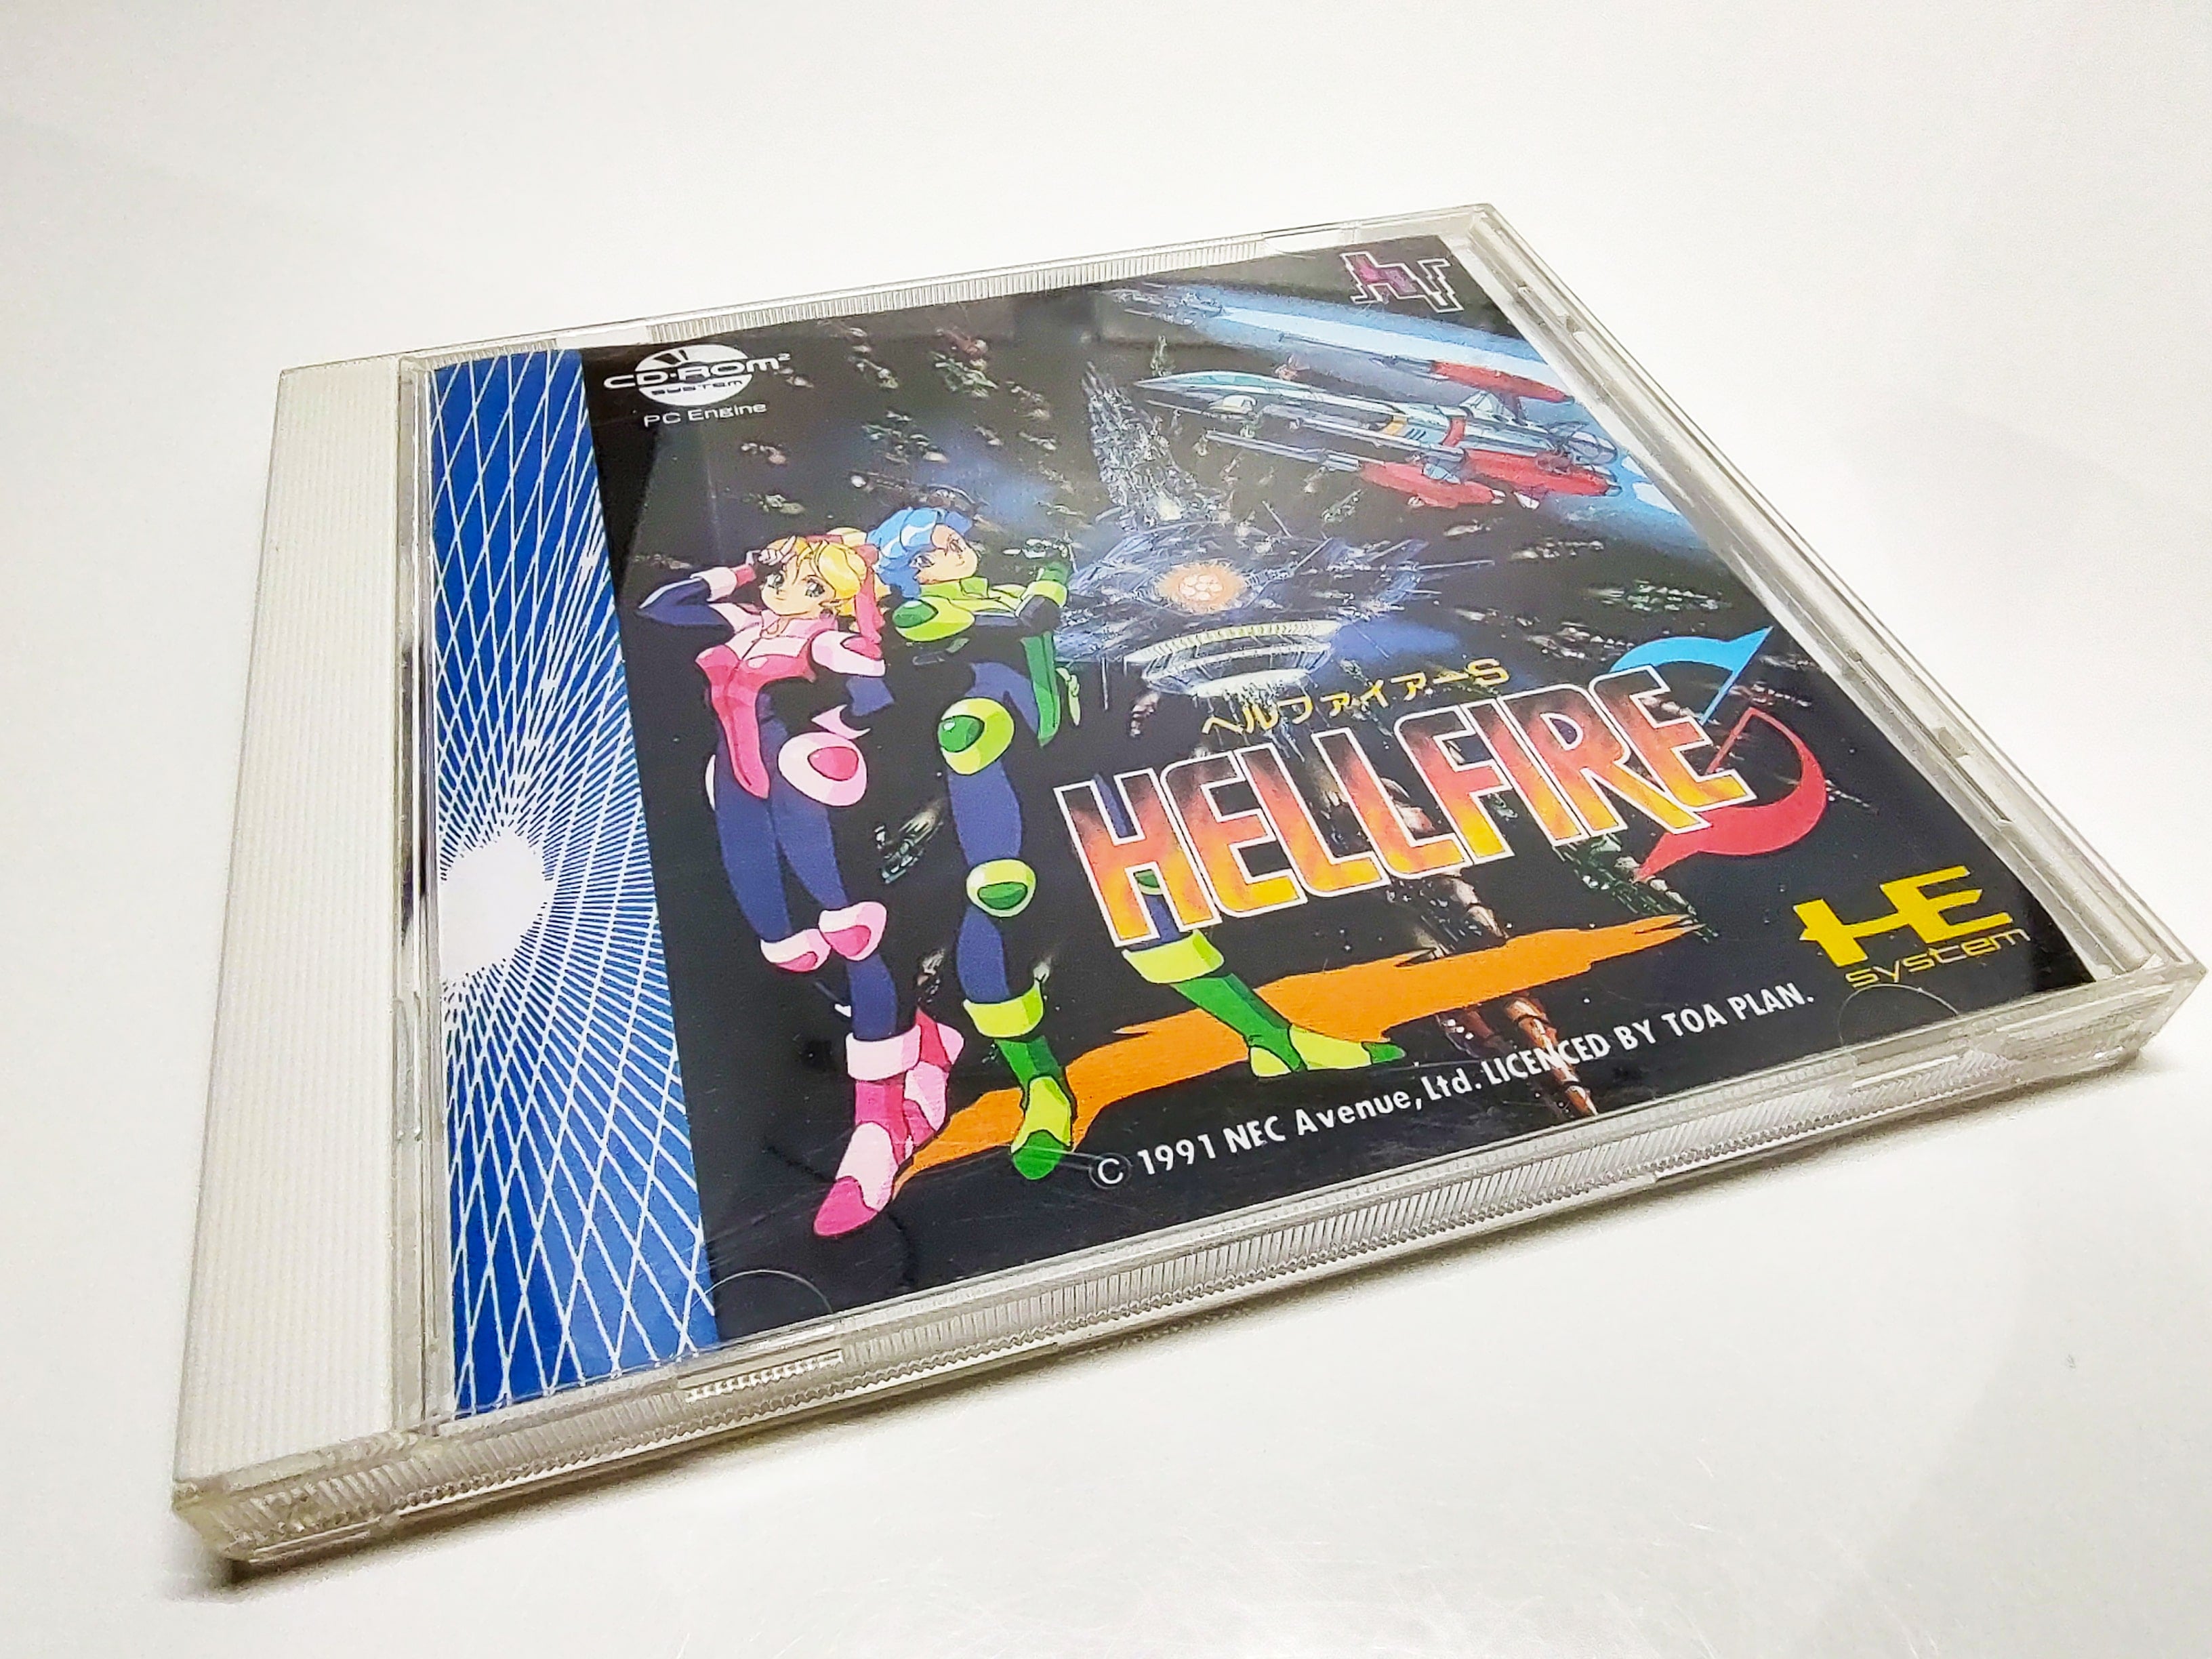 Hellfire S: The Another Story | PC Engine | Case